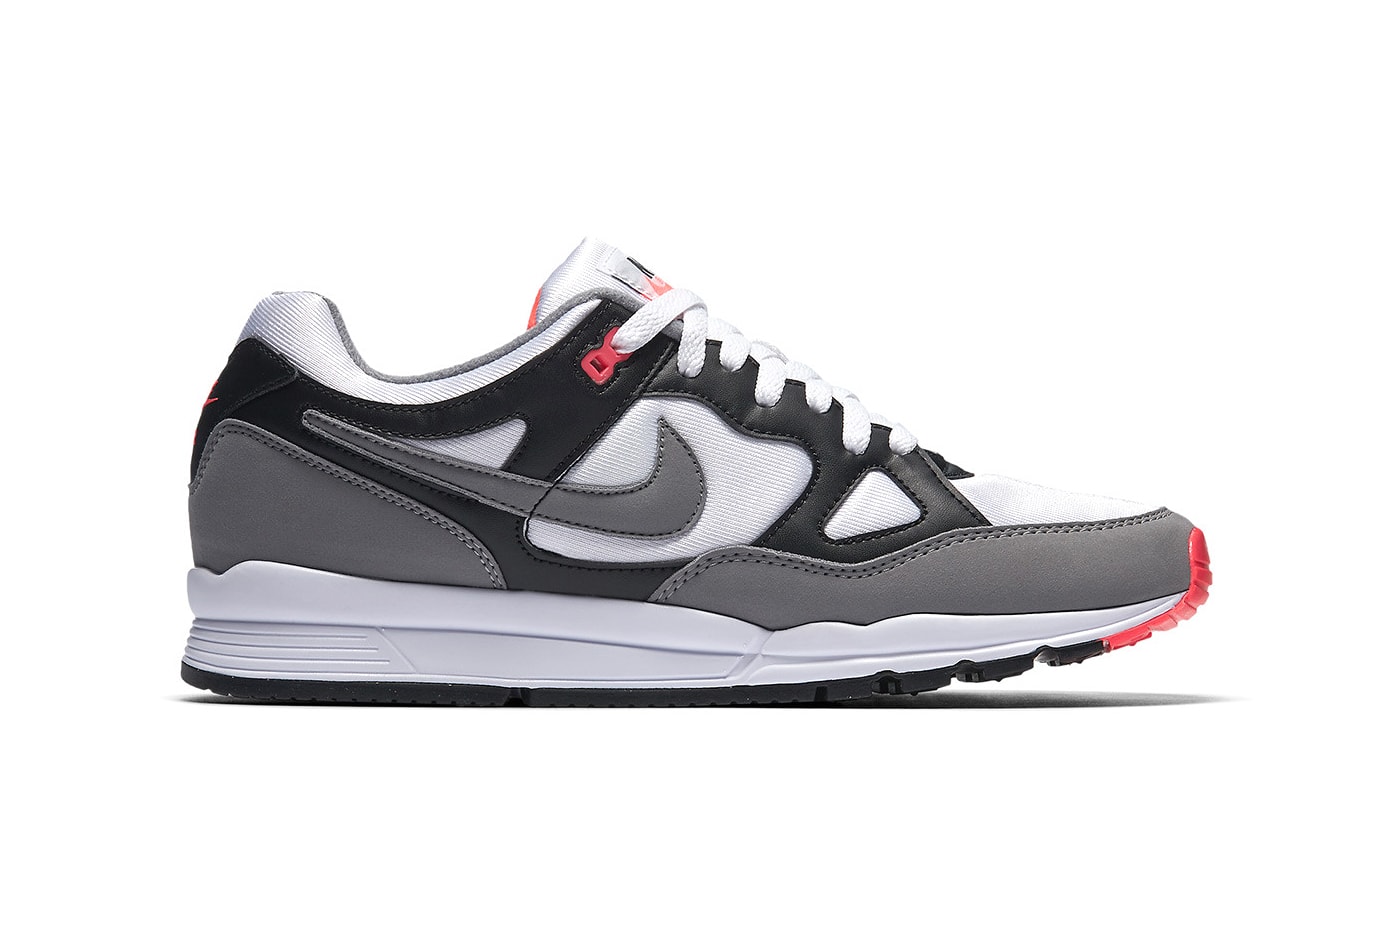 Nike Air Span 2 "Hot Coral" Reissue Patta Collaboration sneaker footwear trainers gray grey black white pink red Release Date Info Pricing